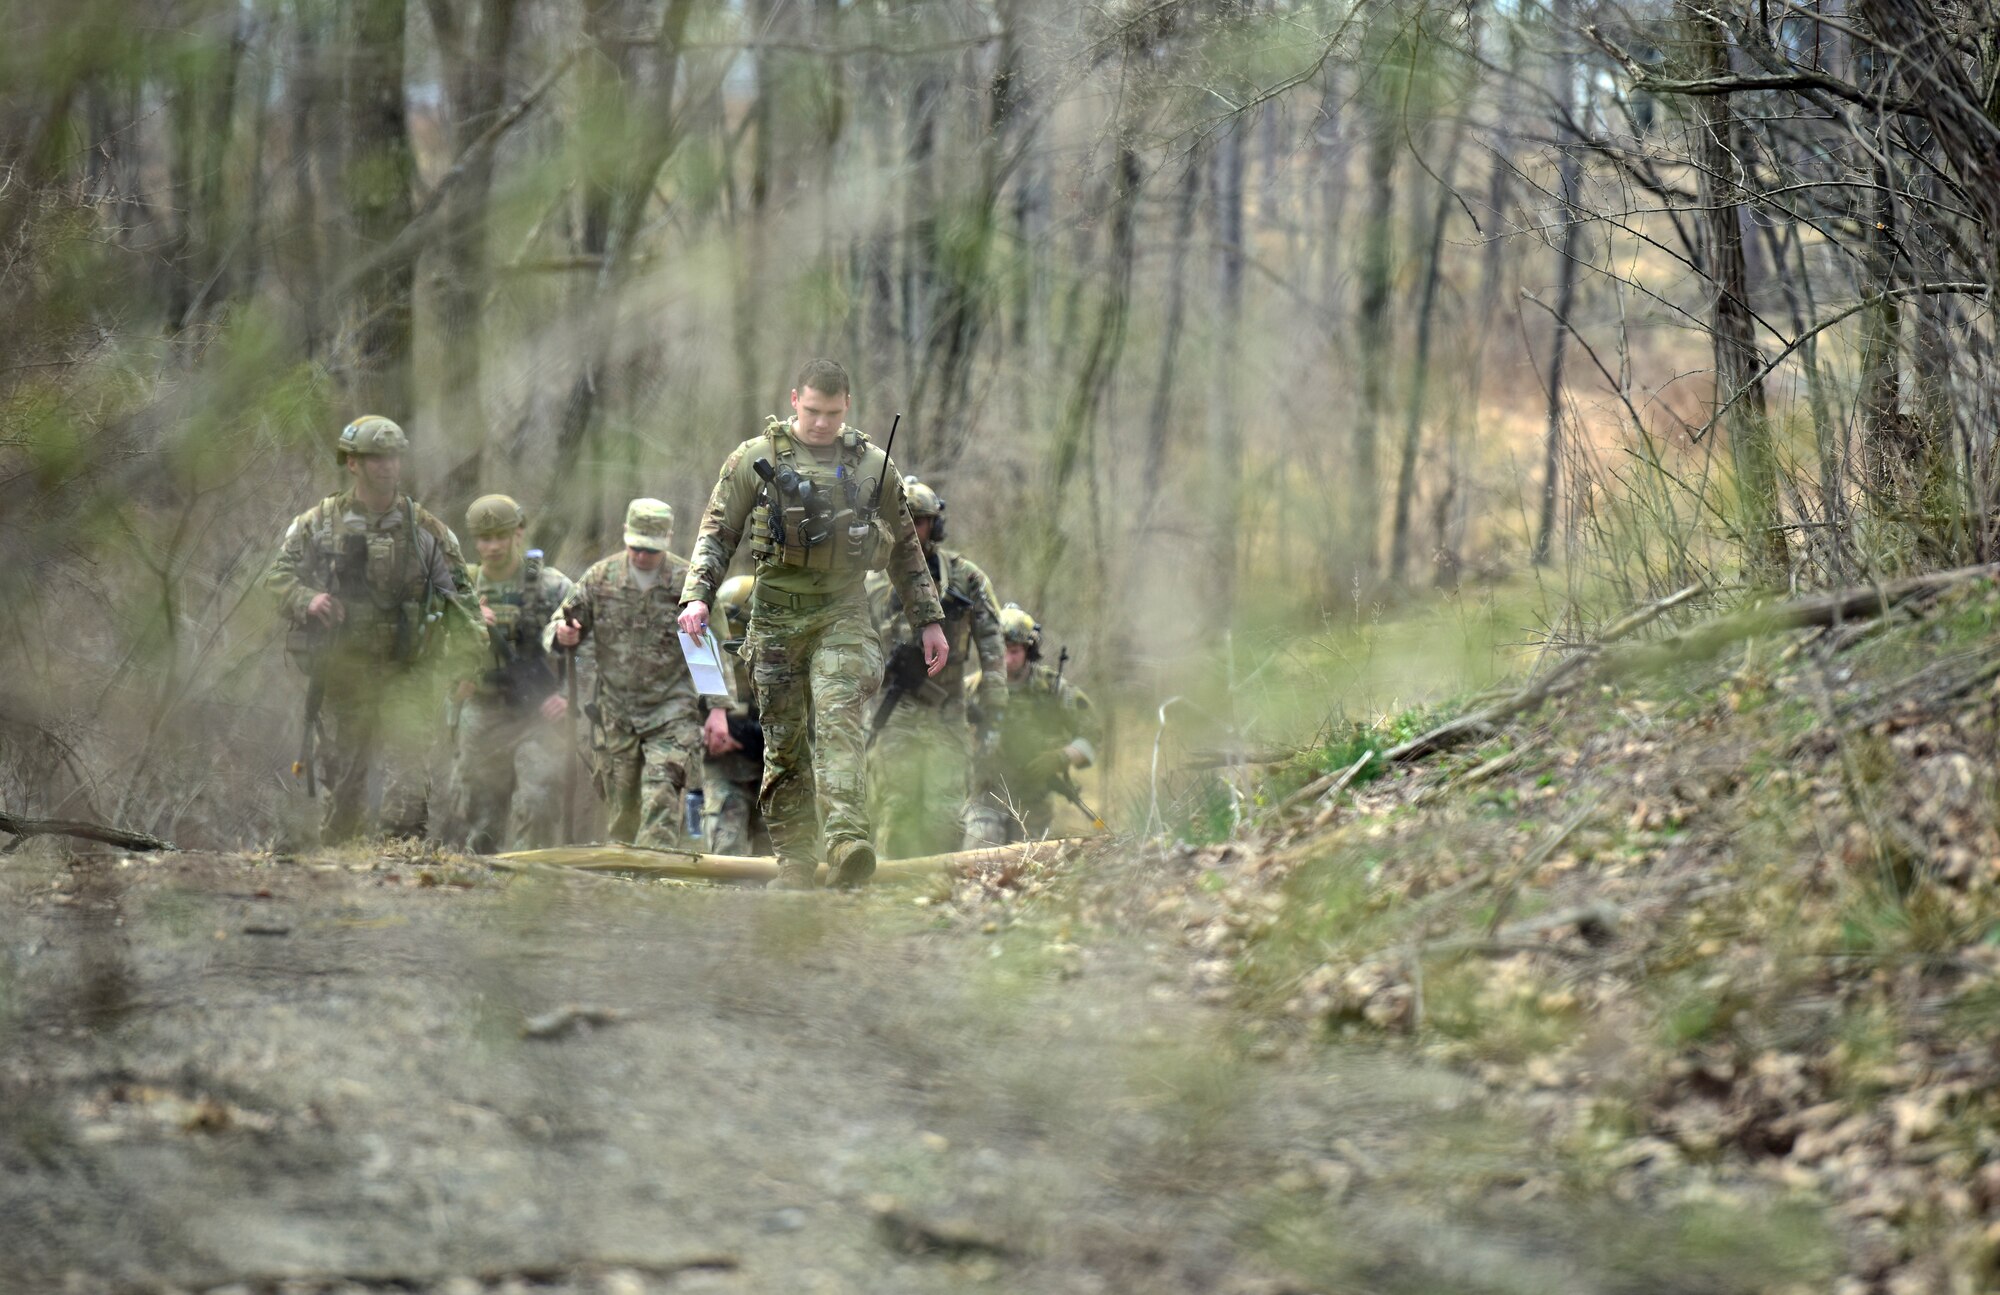 Airmen of the 148th Air Support Operations Squadron, 193rd Special Operations Wing, walk through the woods during a Tactical Combat Casualty Care field training exercise April 6, 2019, at Fort Indiantown Gap, Annville, Pennsylvania. Airmen participating in the FTX were separated into groups differentiating between being positioned with vehicles as well as on foot. (U.S. Air National Guard photo by Staff Sgt. Rachel Loftis)